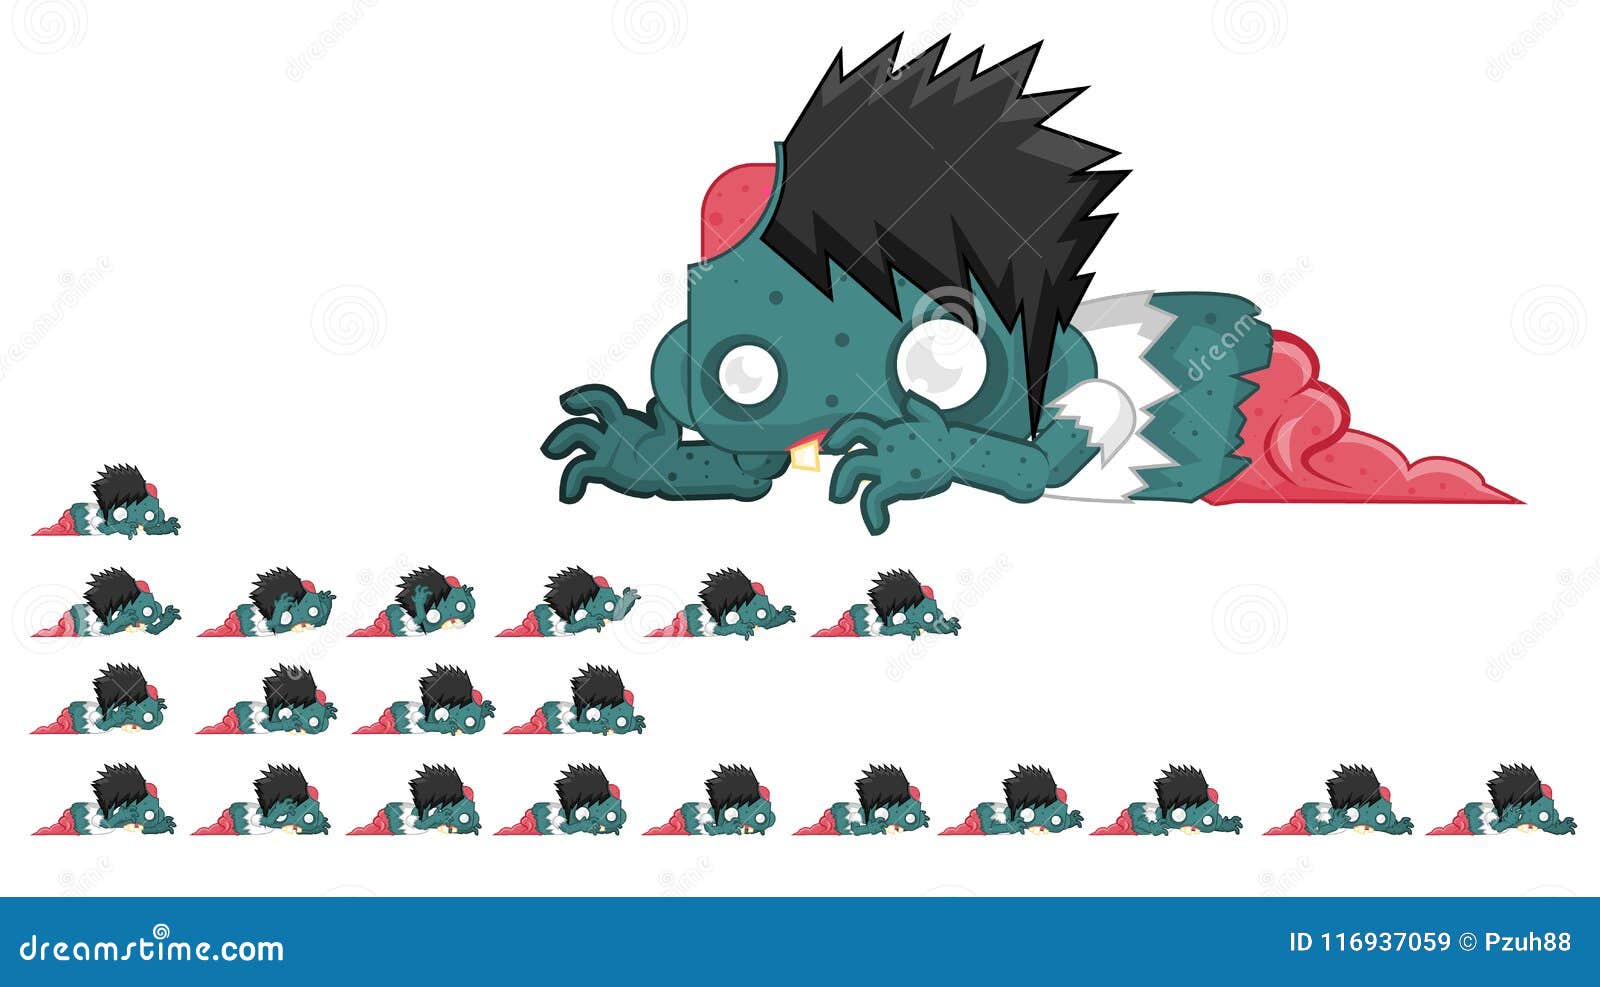 Animated Zombie Character Sprites Stock Vector - Illustration of asset,  people: 116937059